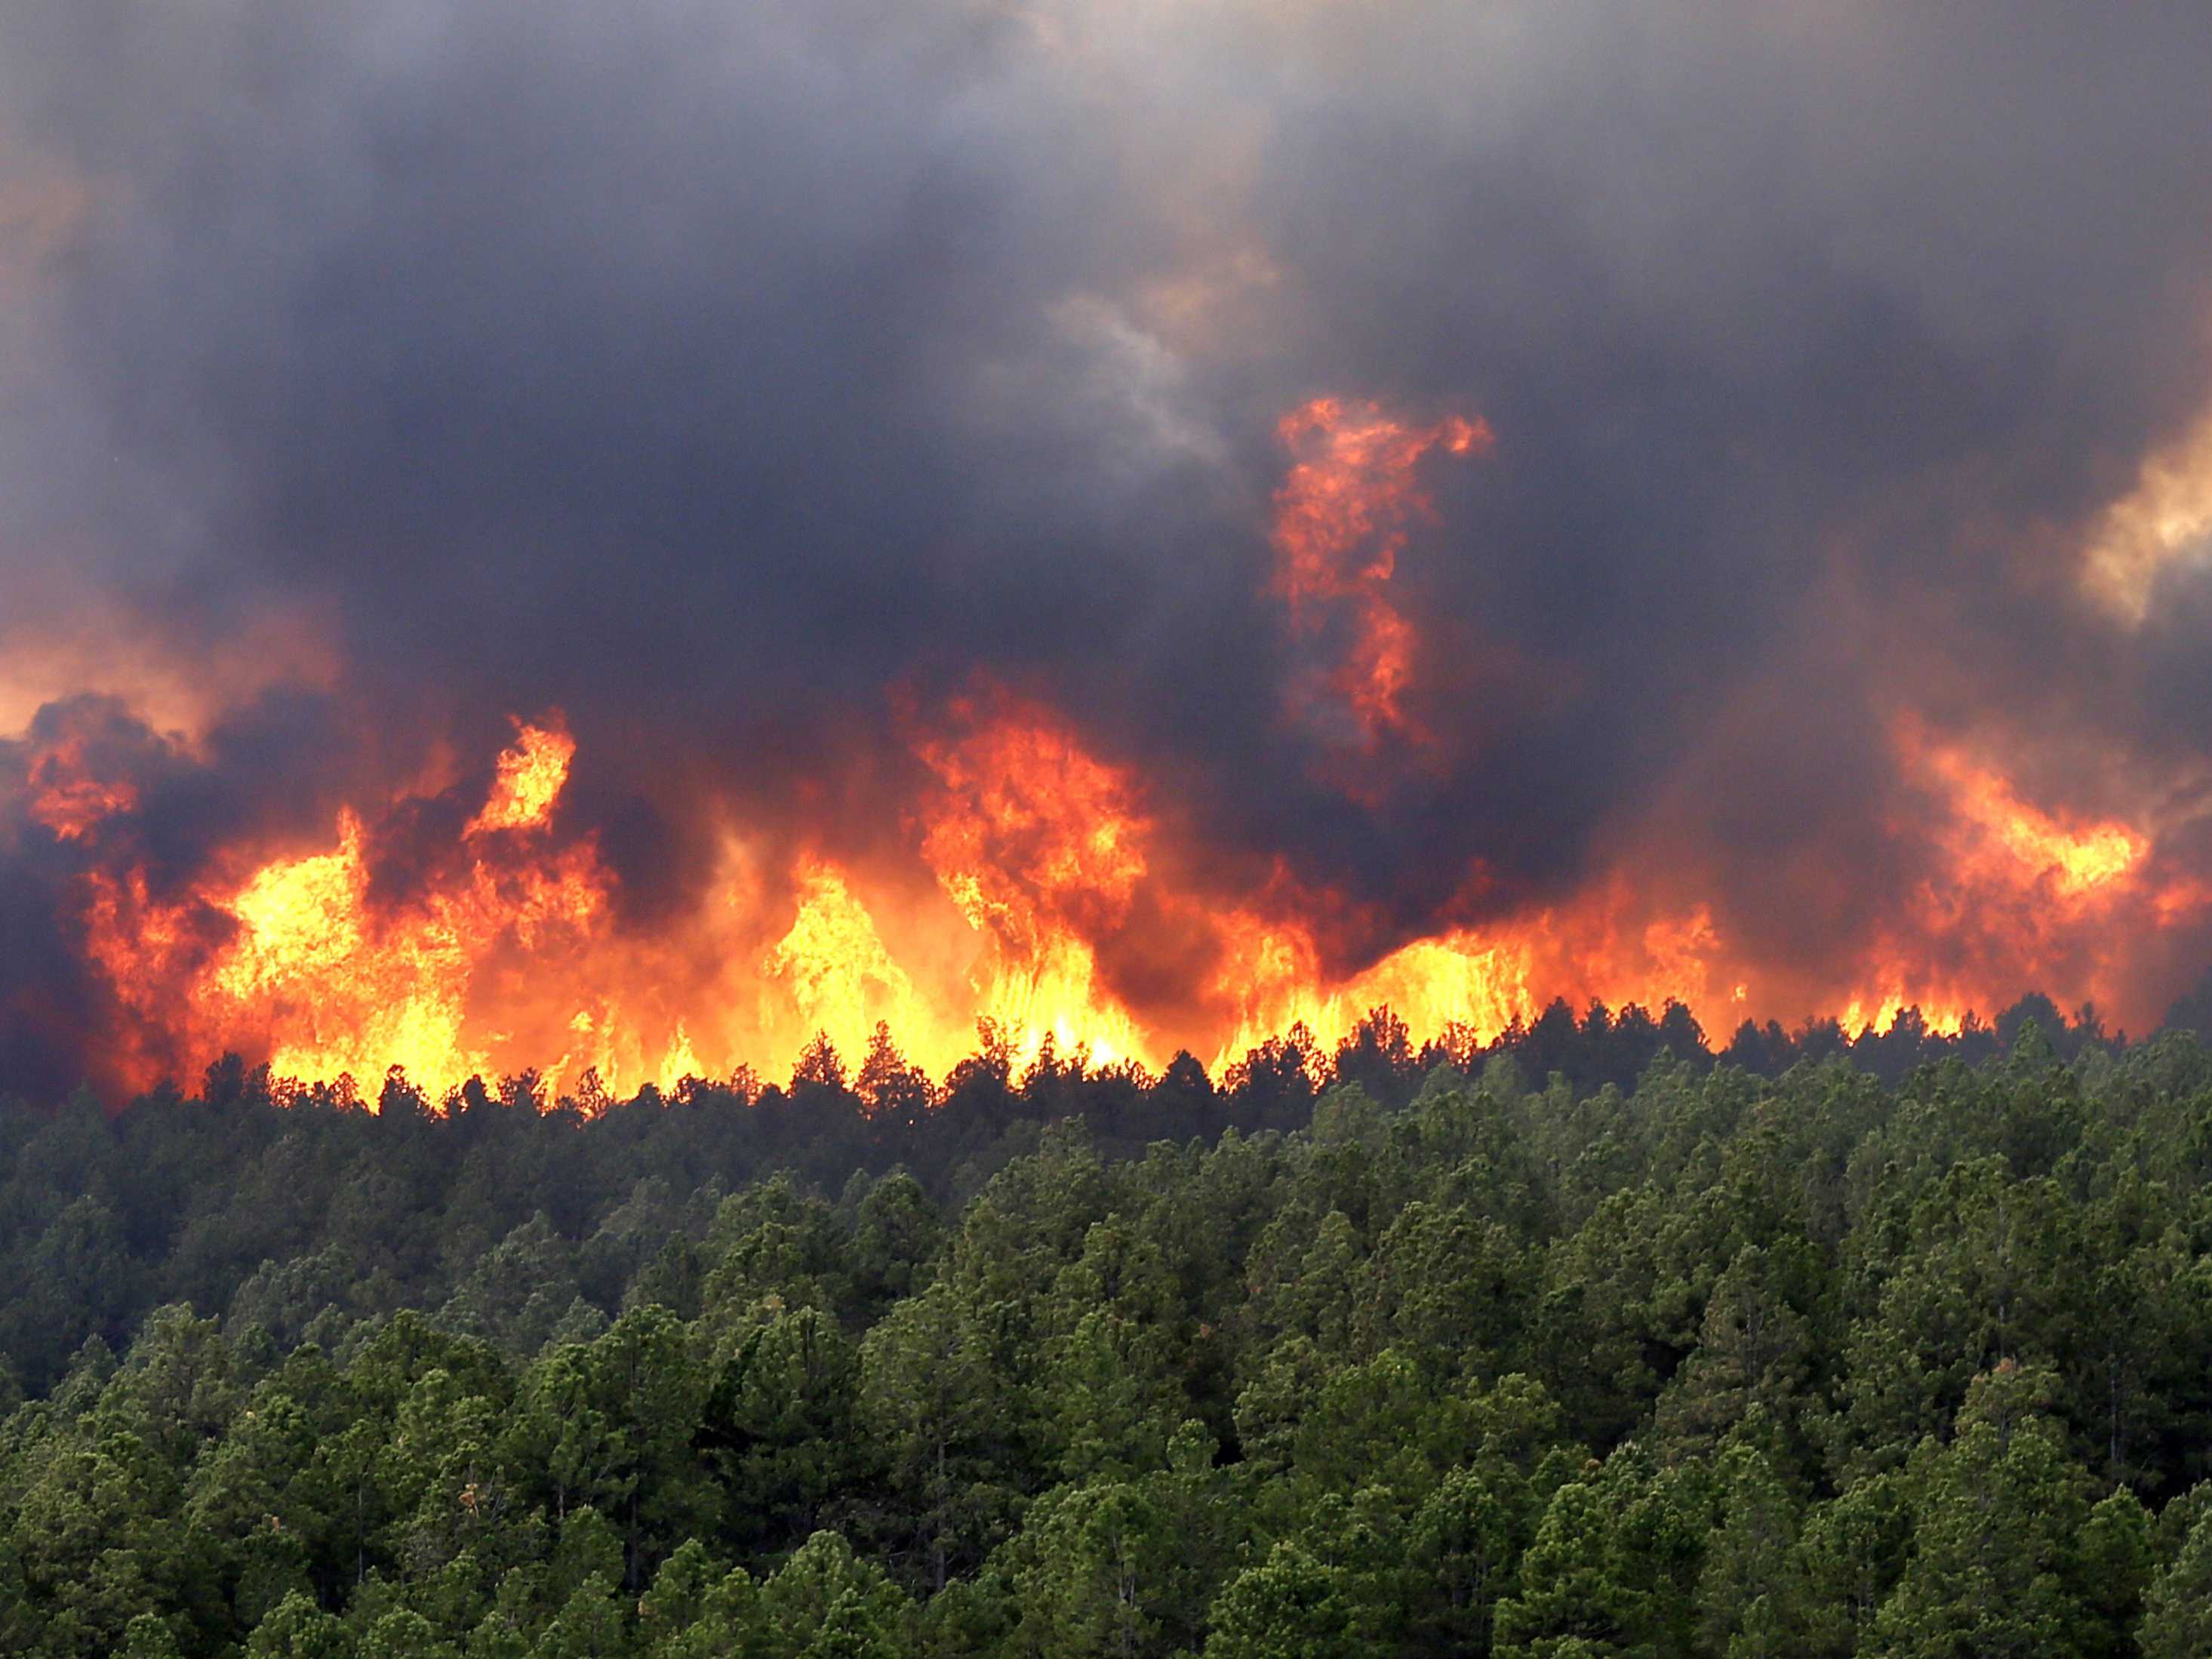 Image: Mega forest fires found to be worsened by incompetent government regulation and mismanagement of forests